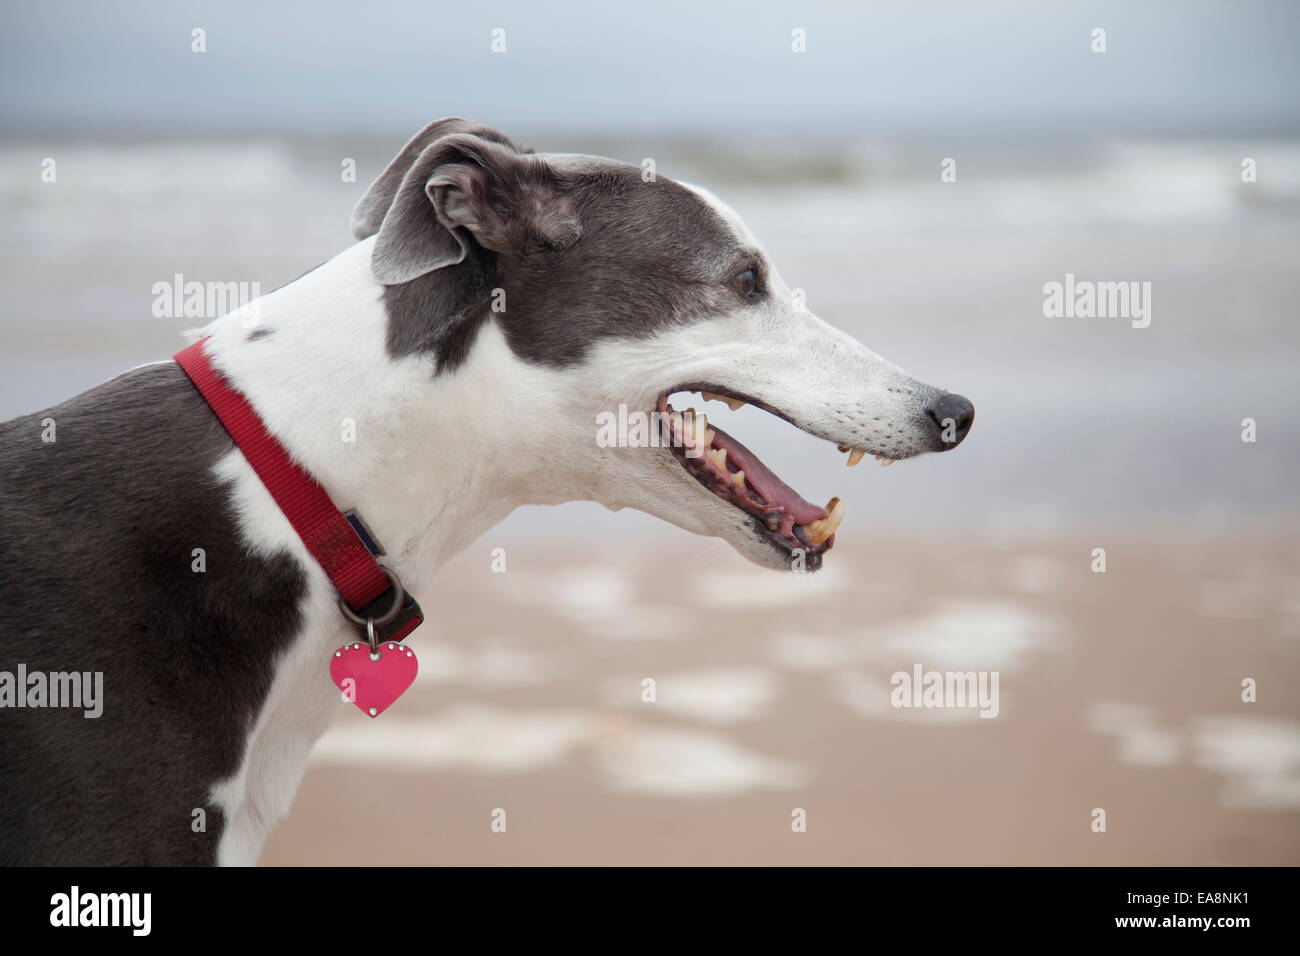 Greyhound dog on the beach wearing a collar and tag. Close up of her head with the beach and sea out of focus in the background. Stock Photo